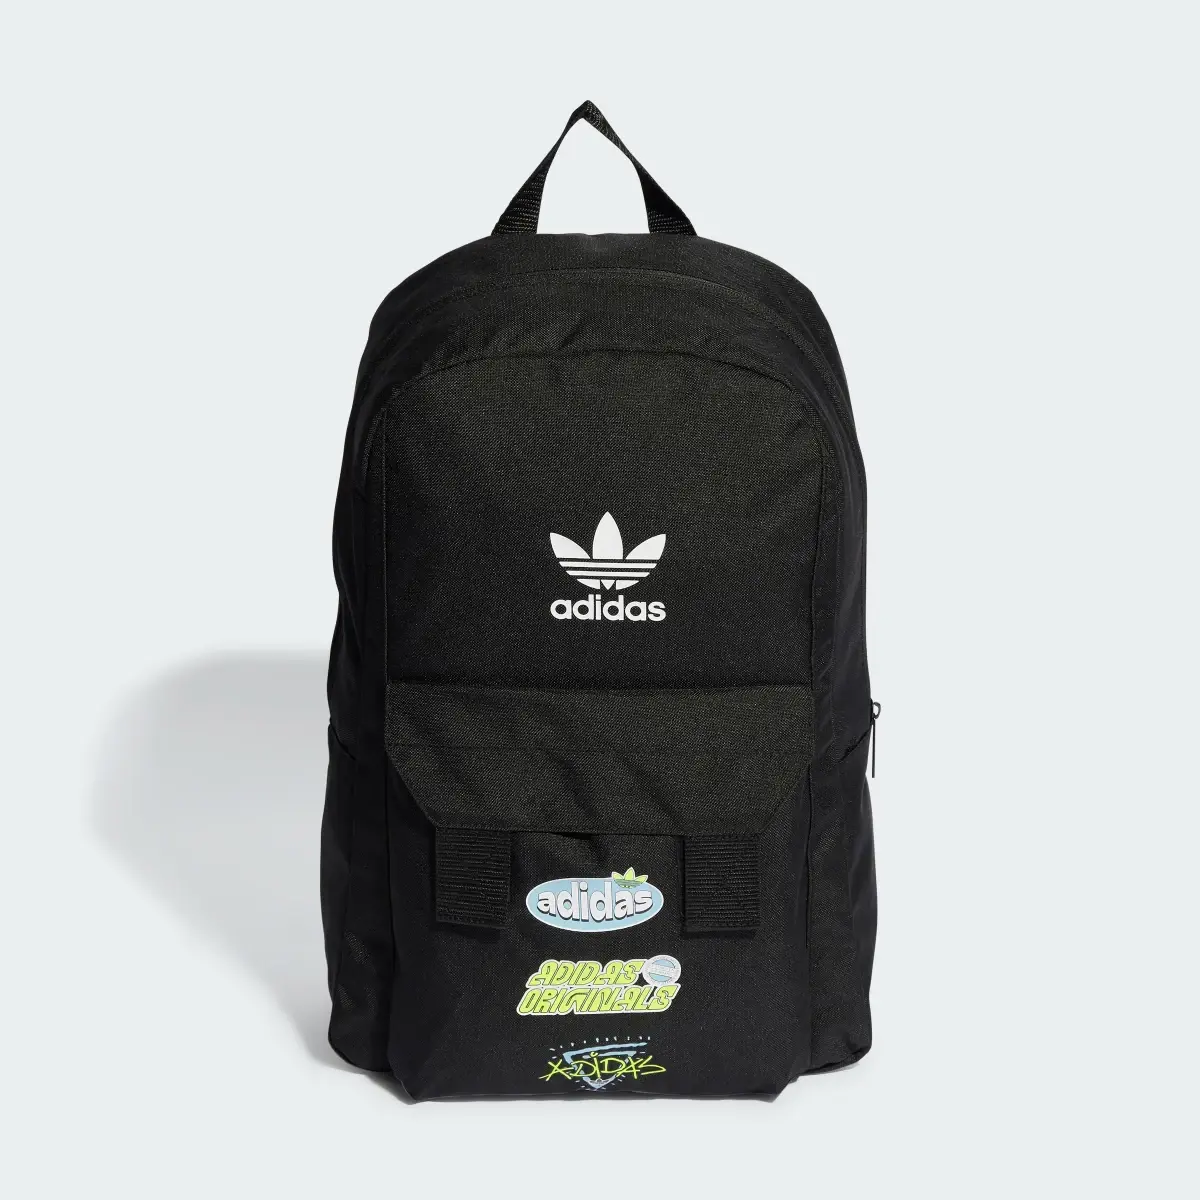 Adidas Graphic Backpack Kids. 2